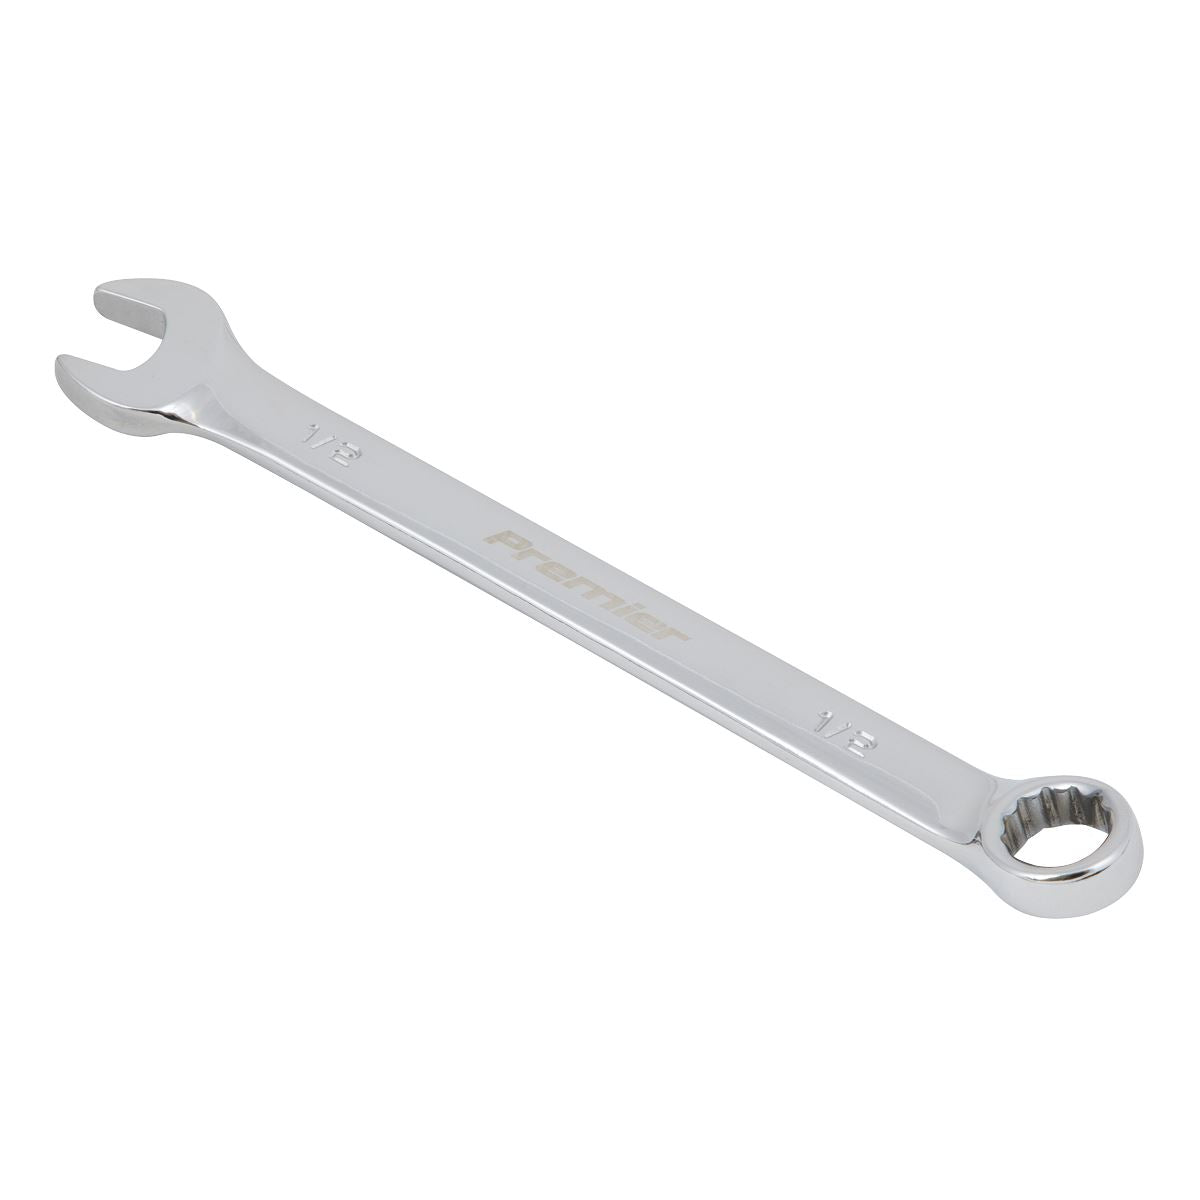 Sealey Premier Combination Spanner 1/2" - Imperial